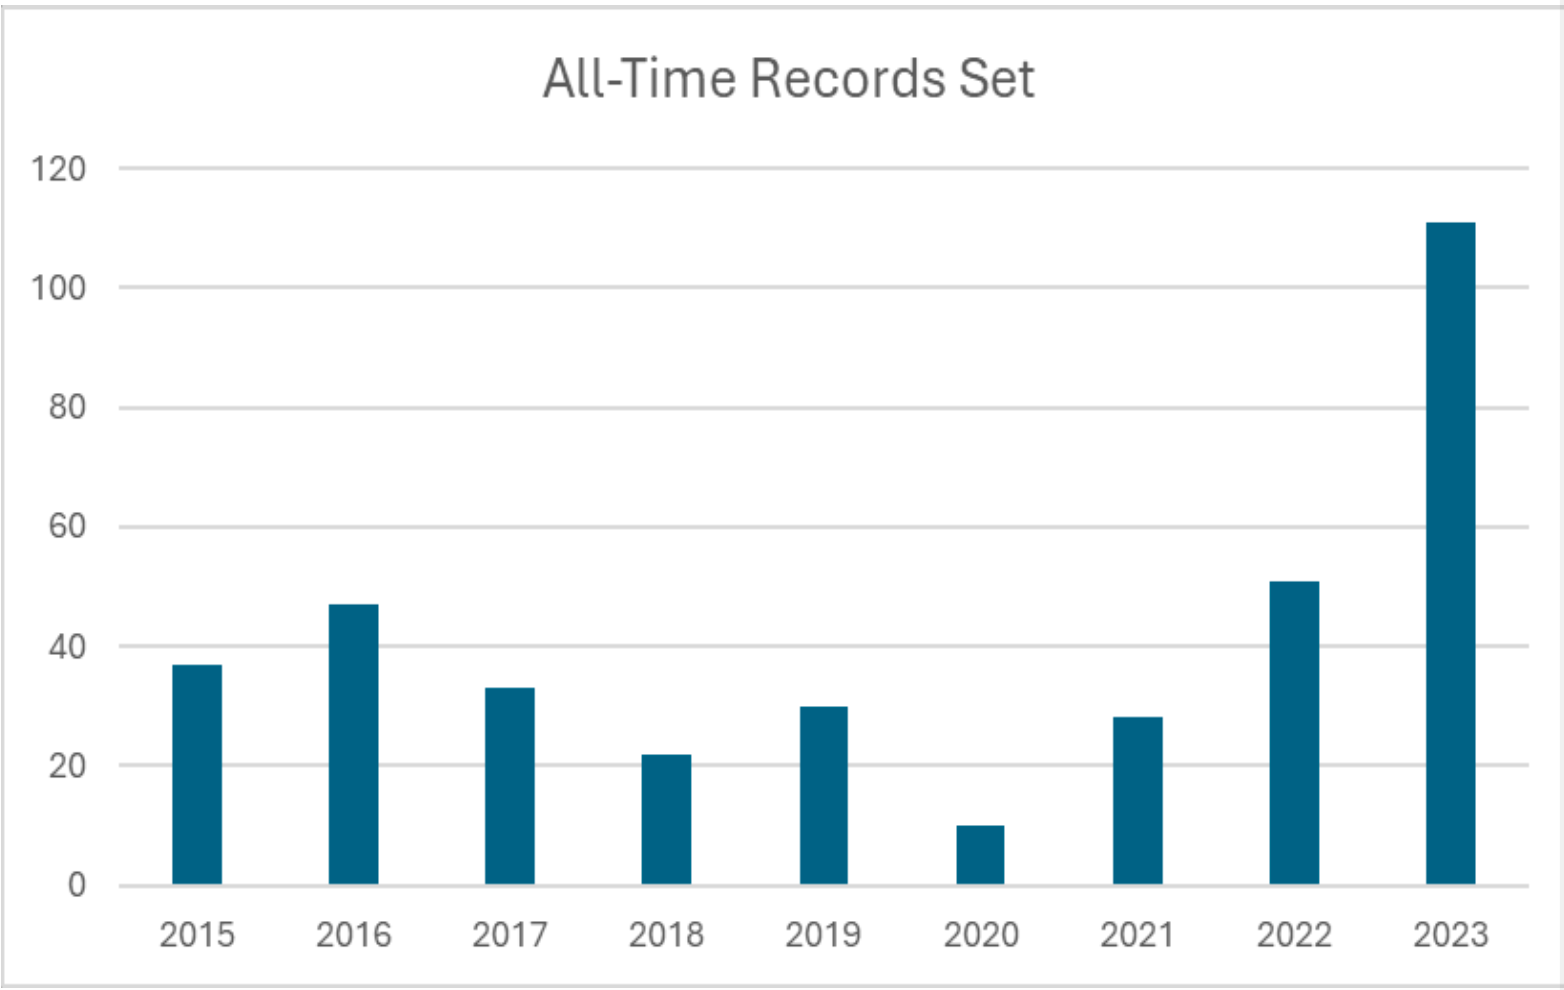 All-Time Records Set